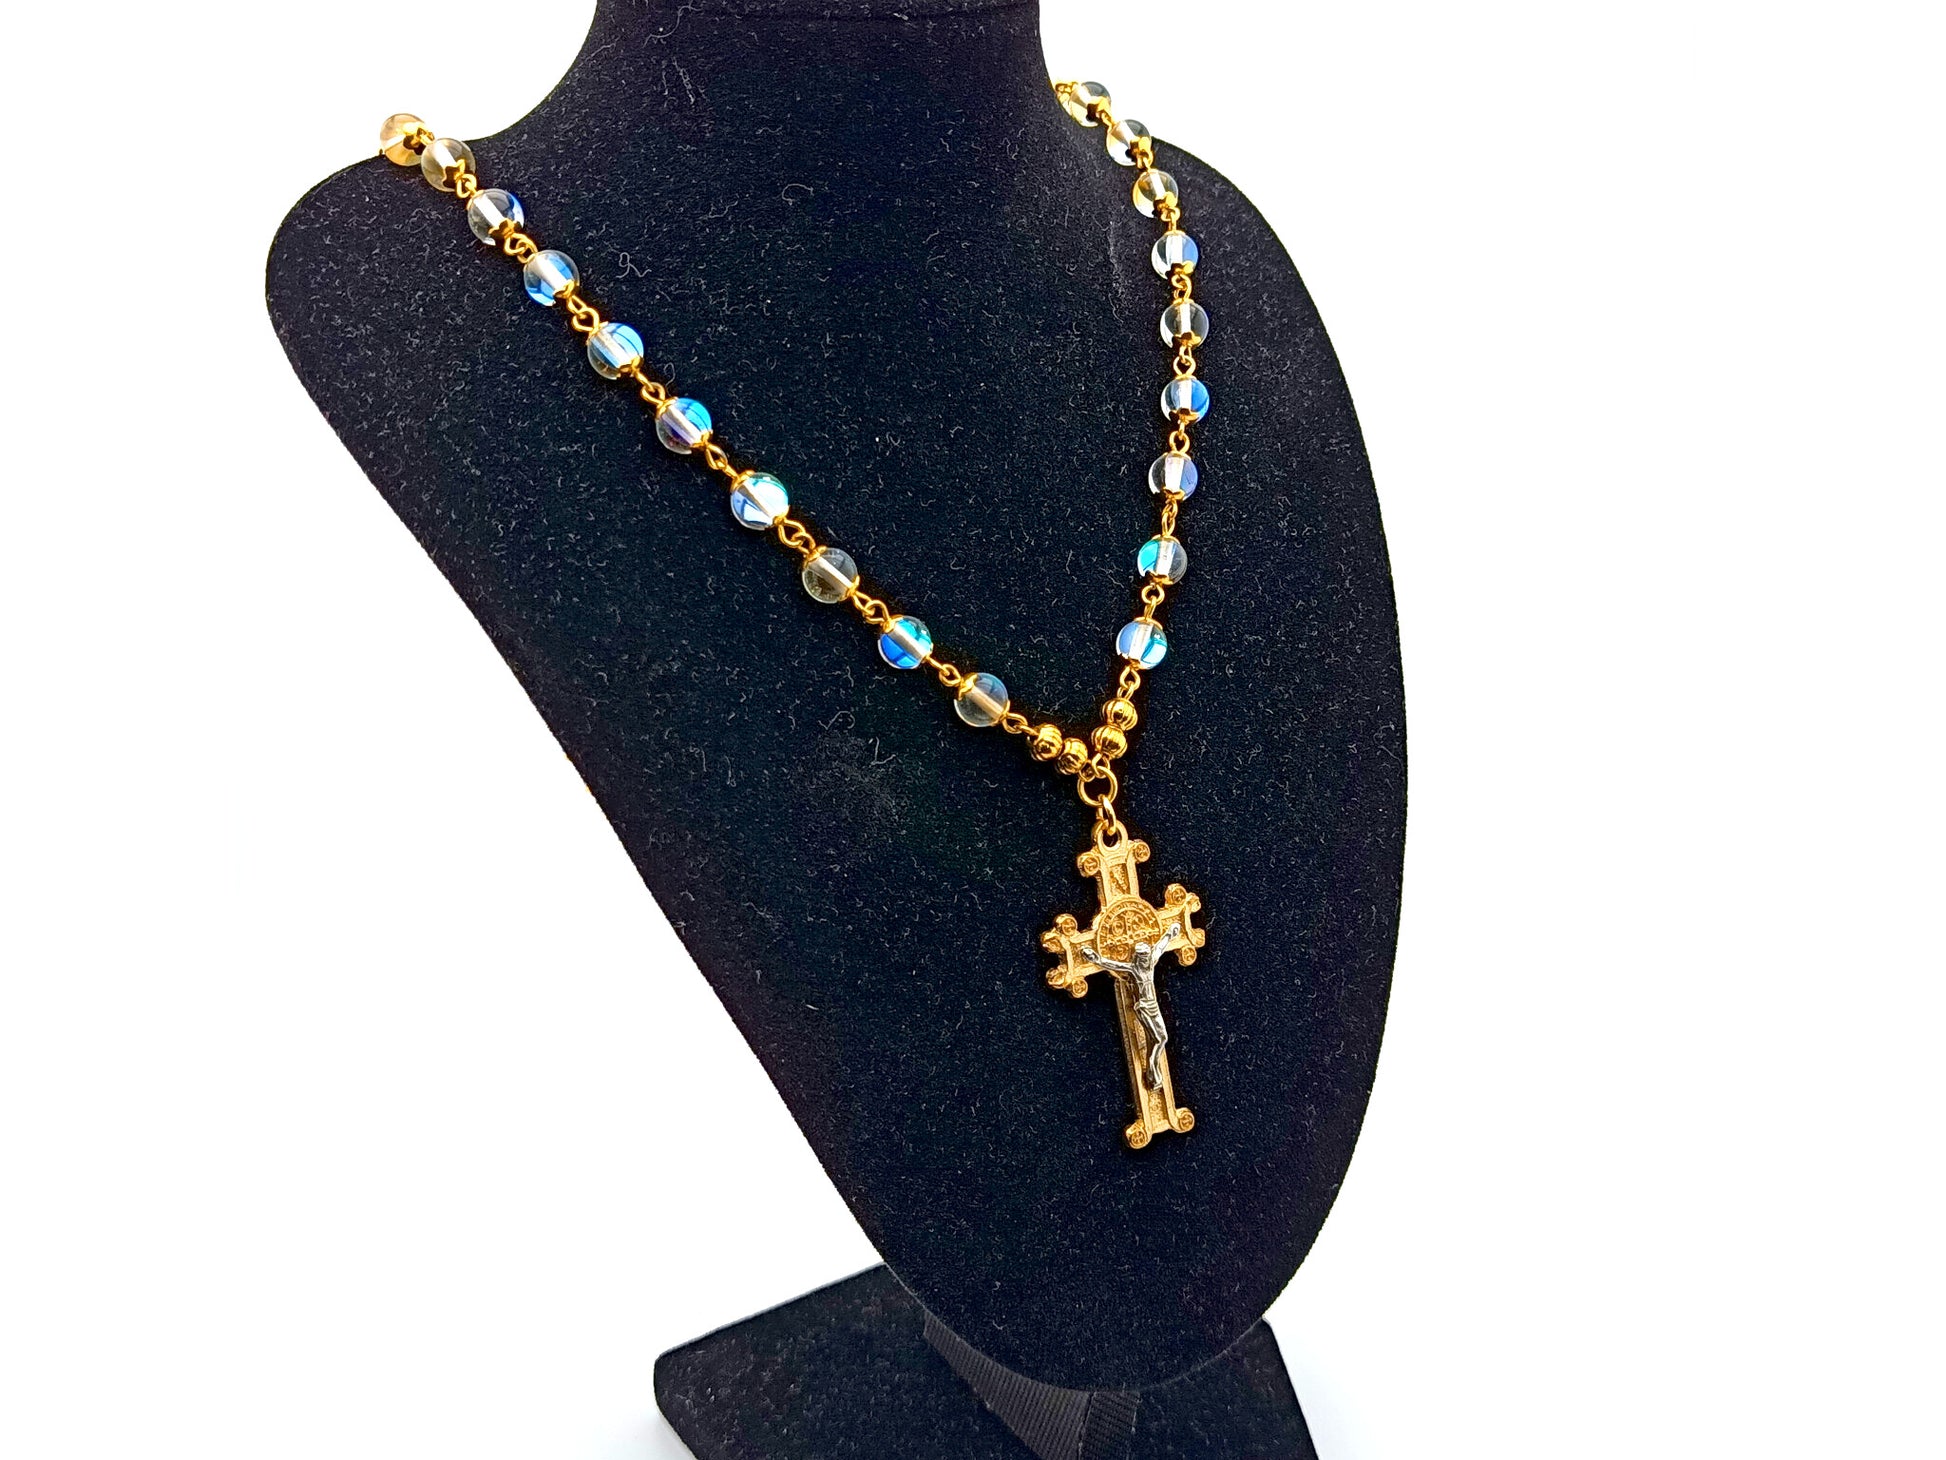 Saint Benedict unique rosary beads necklace and bracelet gift set with clear crystal and gold beads, golden Saint Benedict crucifix and medal.